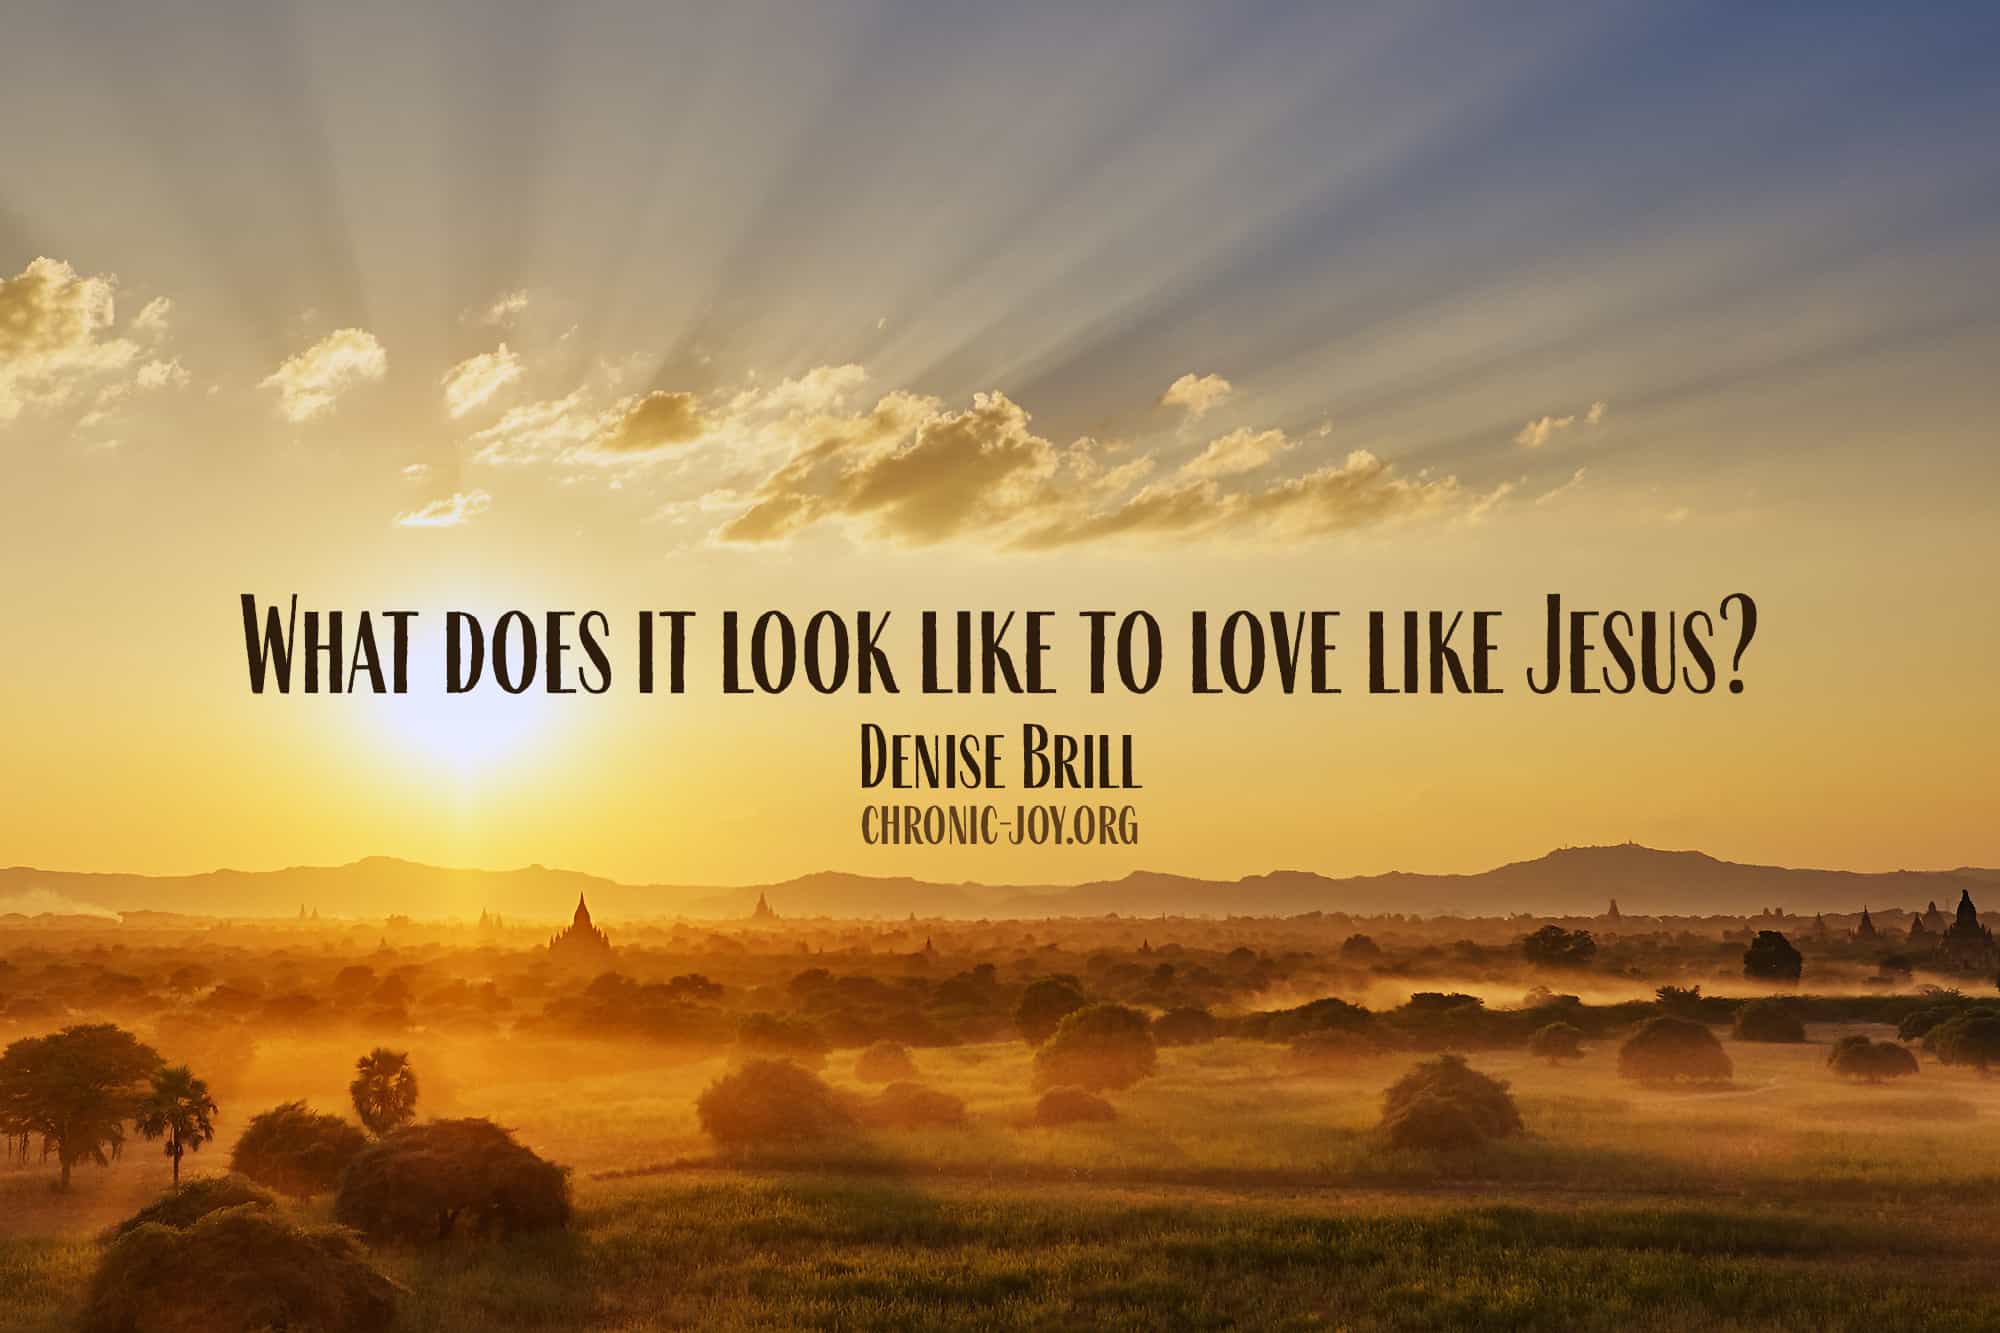 What does it look like to love like Jesus? Denise Brill